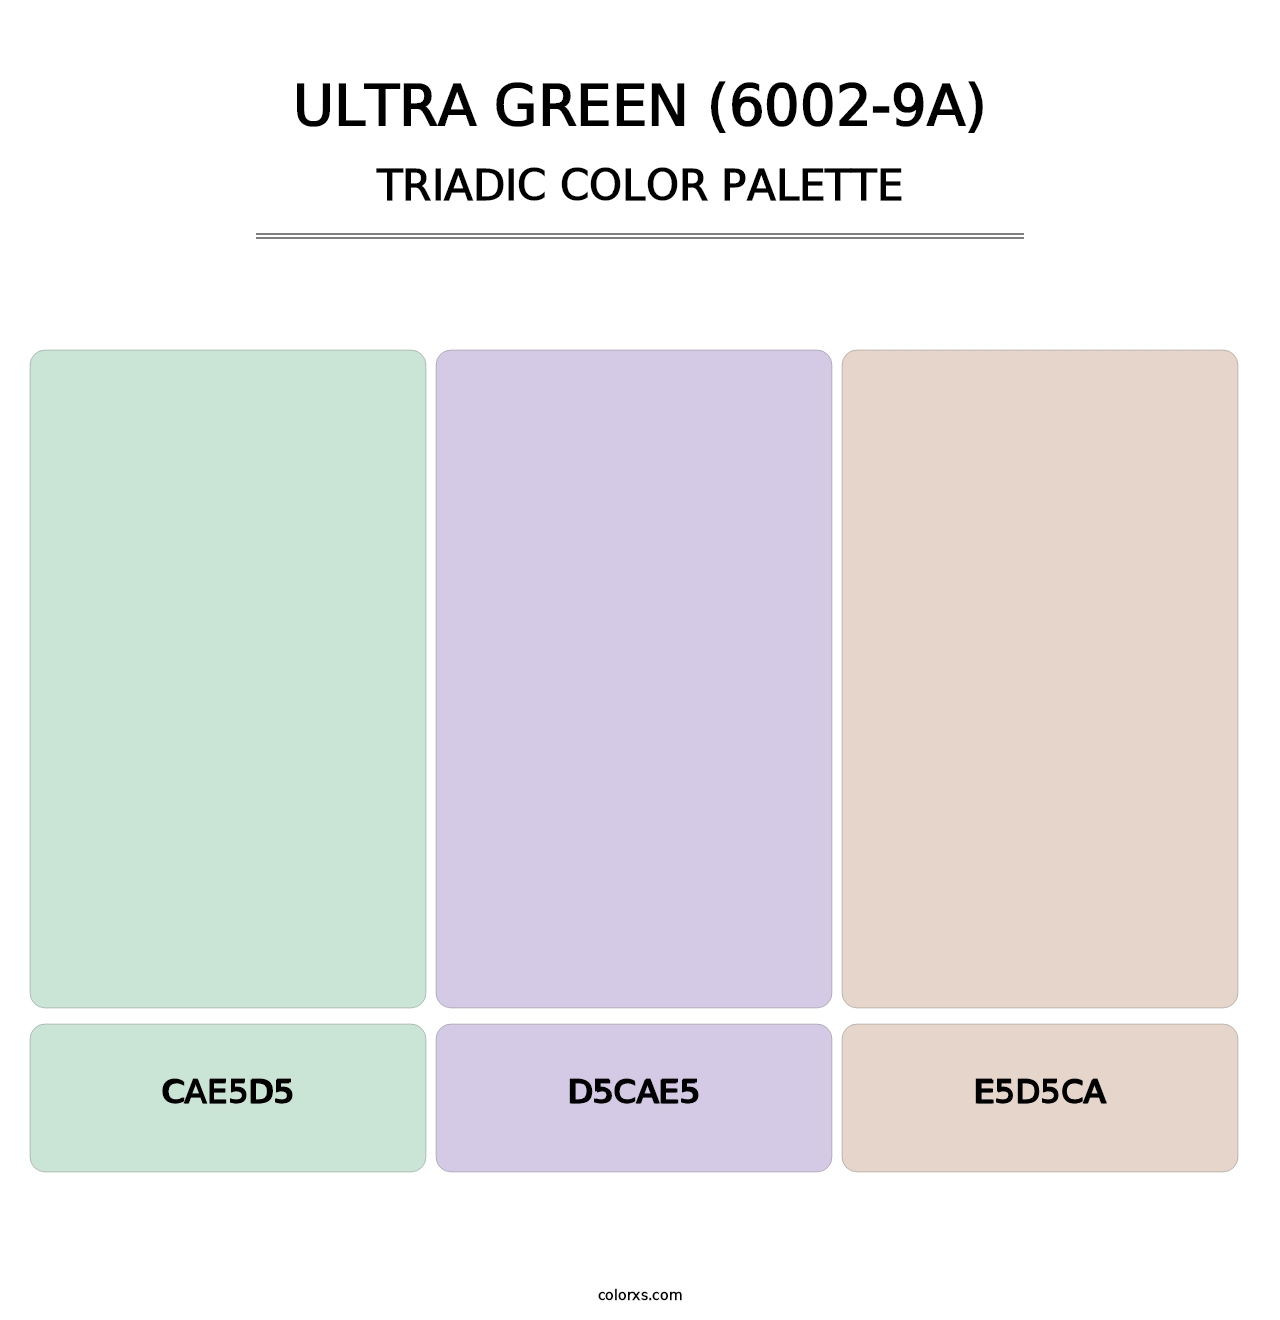 Ultra Green (6002-9A) - Triadic Color Palette